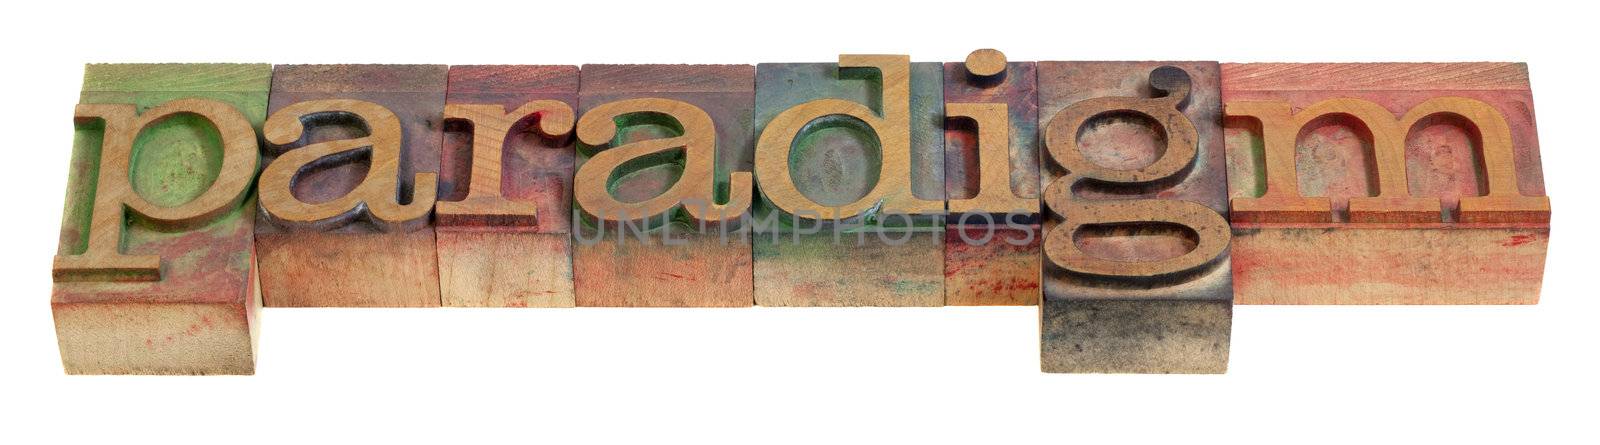 paradigm - a word in vintage wooden letterpress prinitng blocks, isolated on white